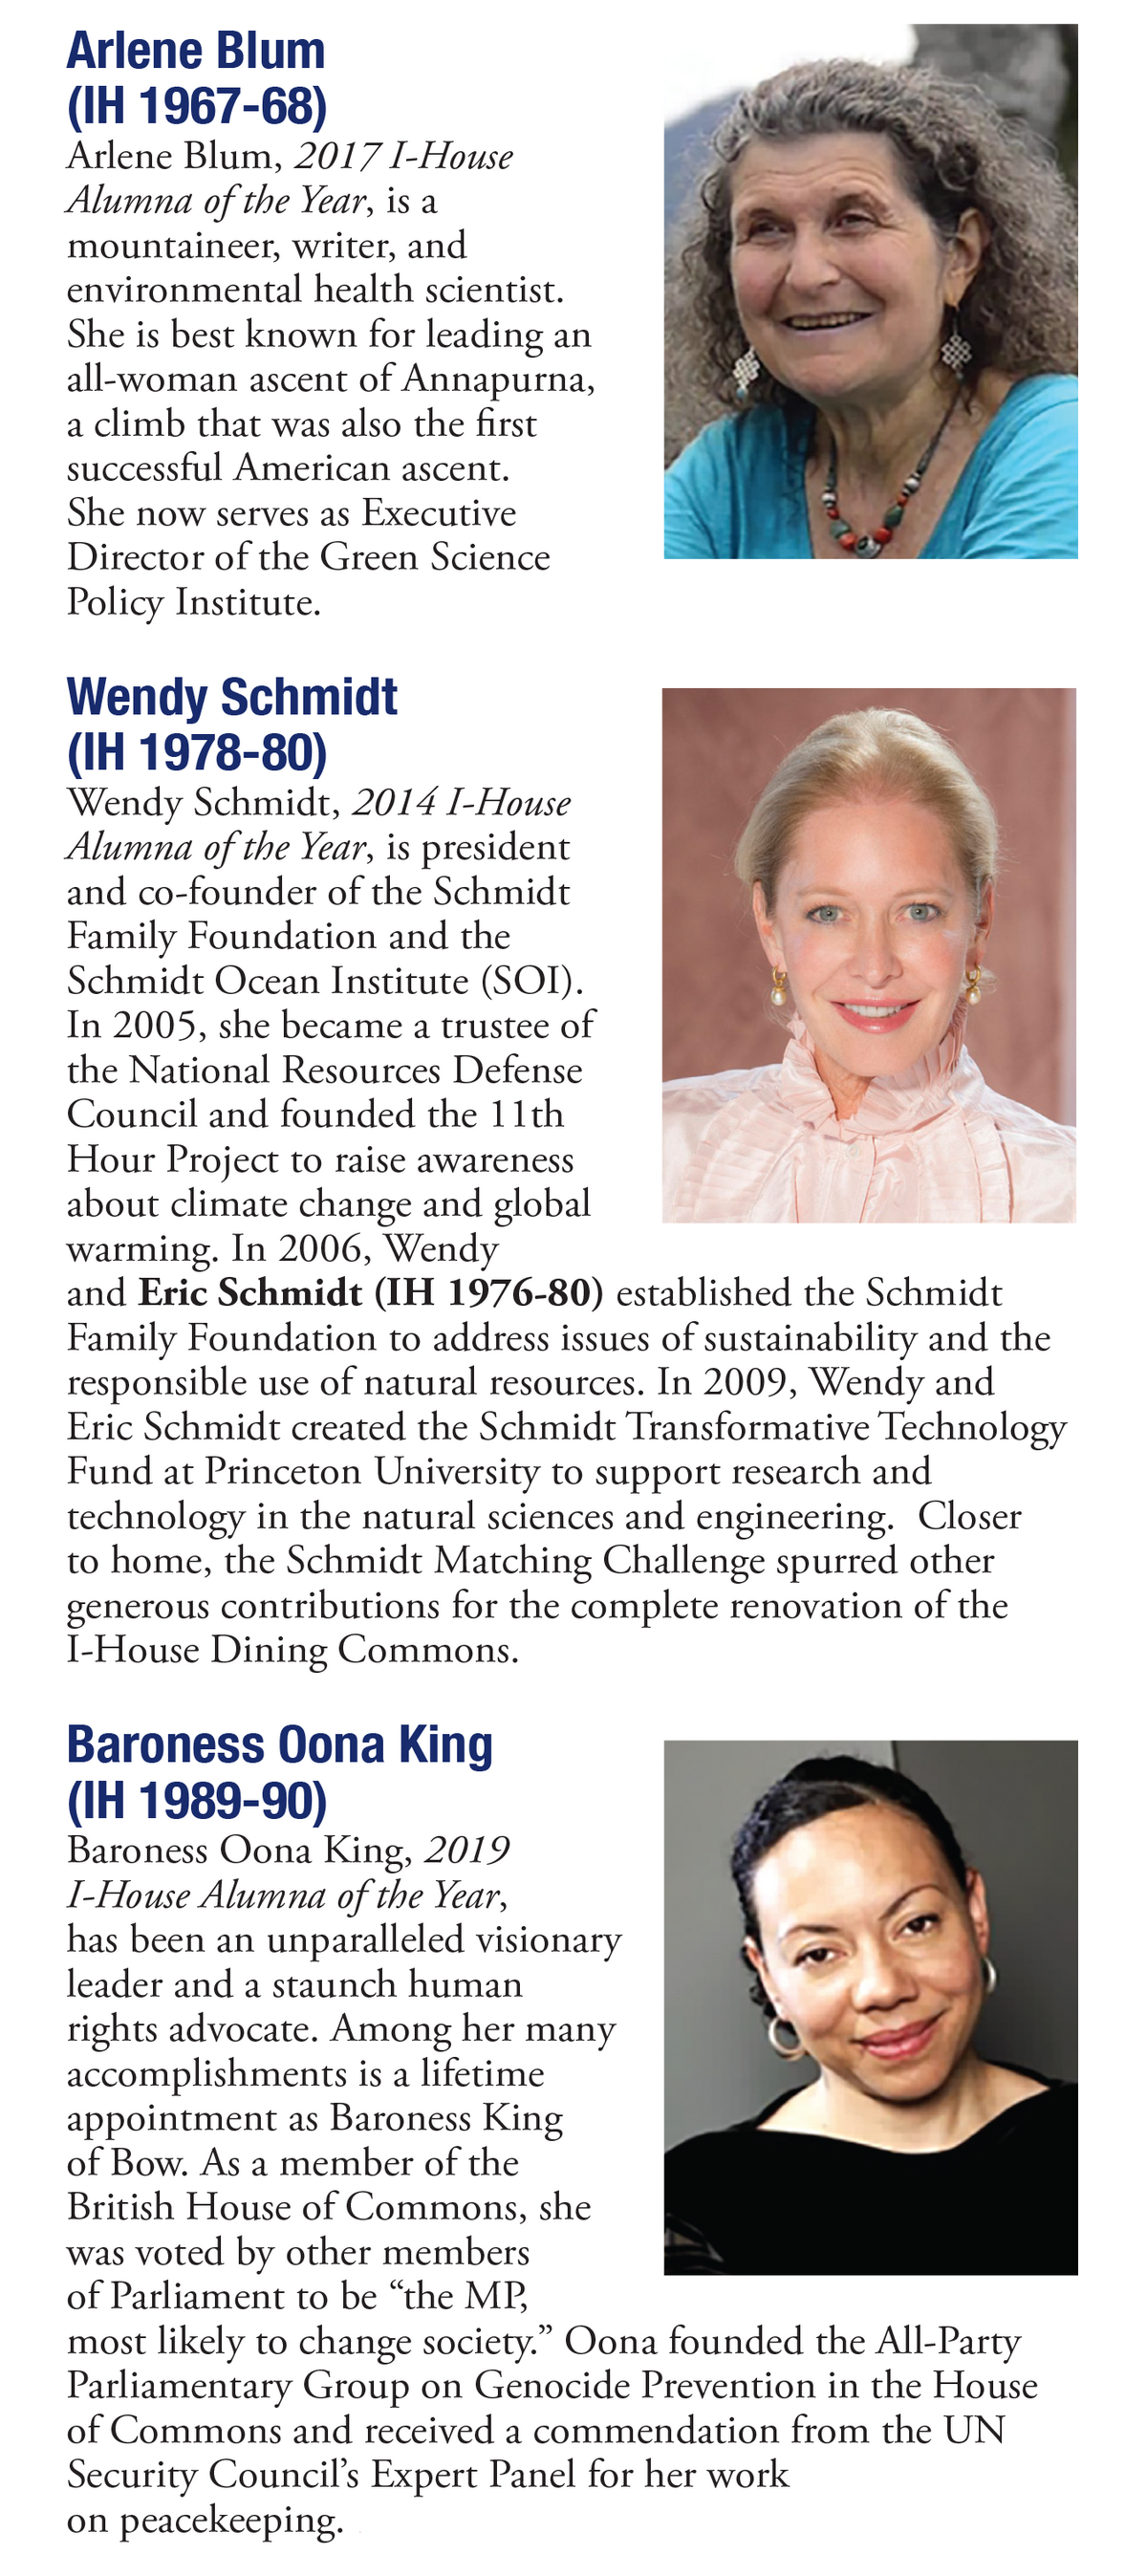 ID: screenshot of iHouse Times with short bios, which can be found at https://ihouse.berkeley.edu/alumni-engagement/notable-alumni